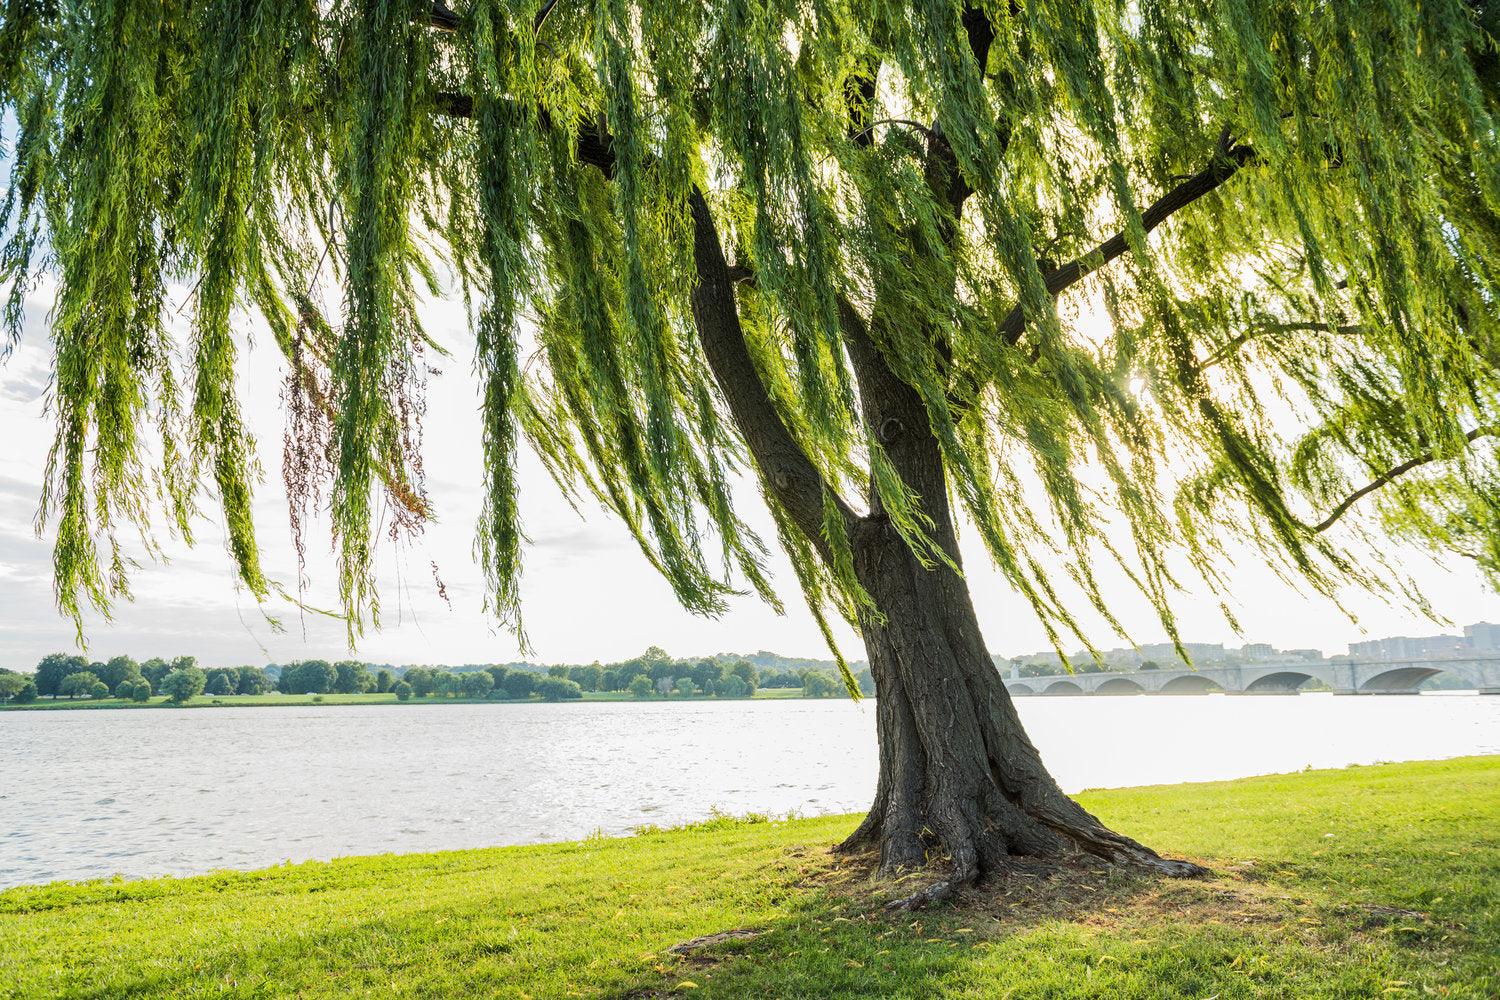 A willow tree stands by a tranquil lake, its delicate branches swaying gently in the breeze, with the sun casting a warm glow on the serene waters.